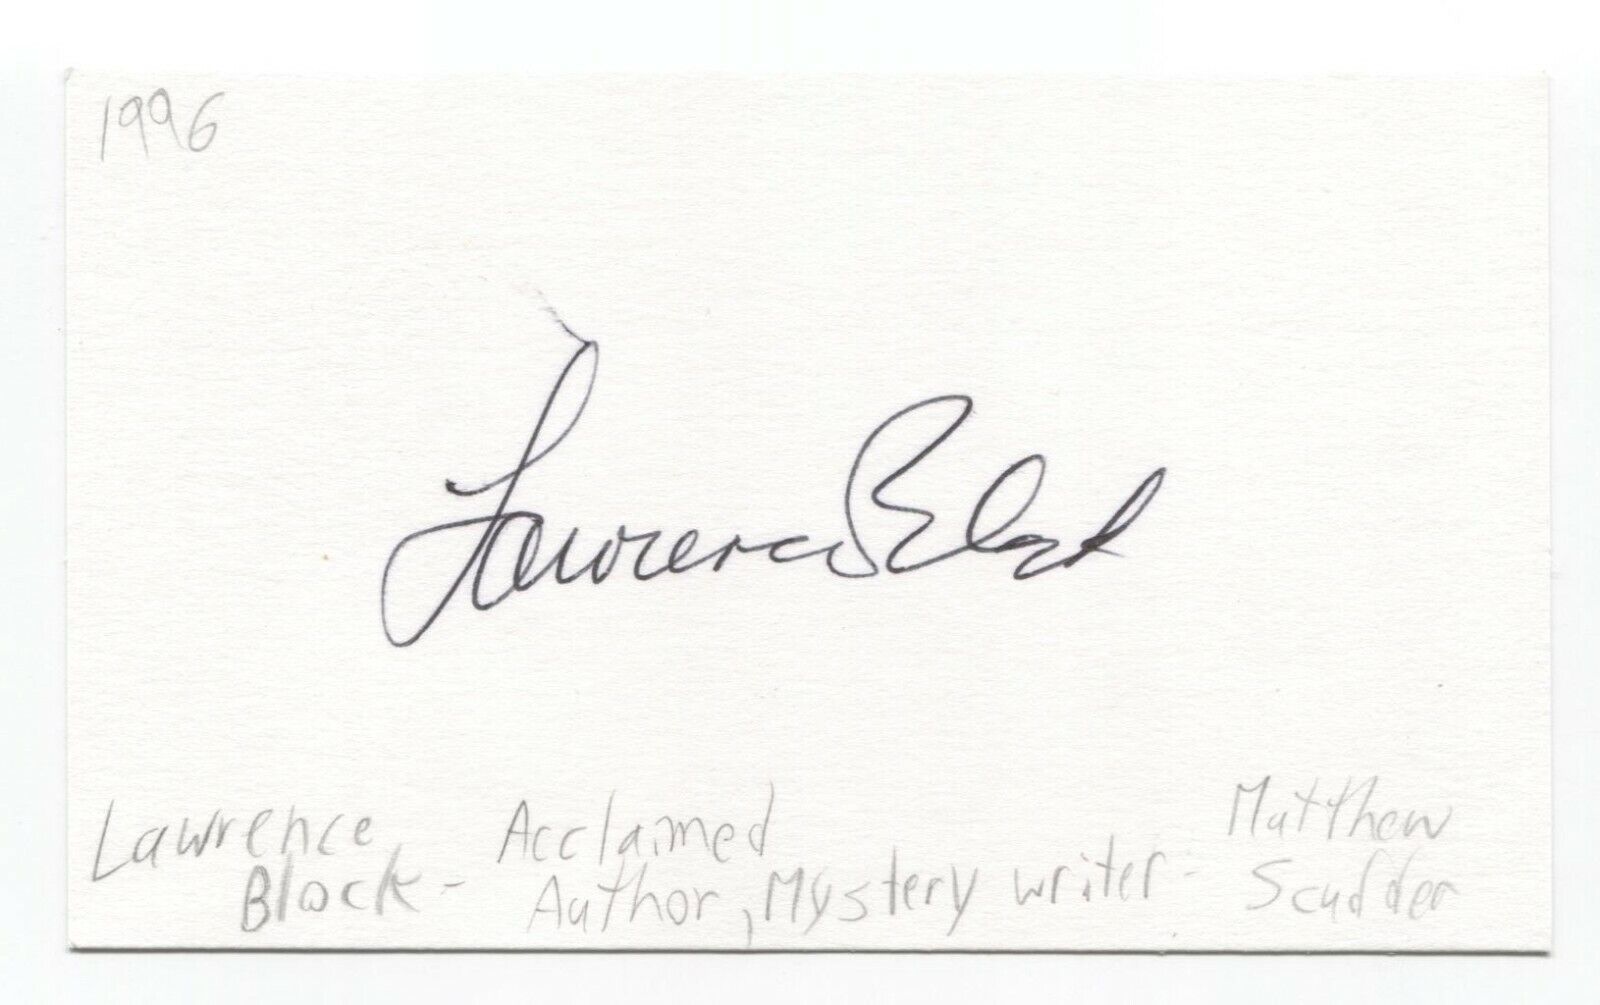 Lawrence Block Signed 3x5 Index Card Autographed Signature Author Writer